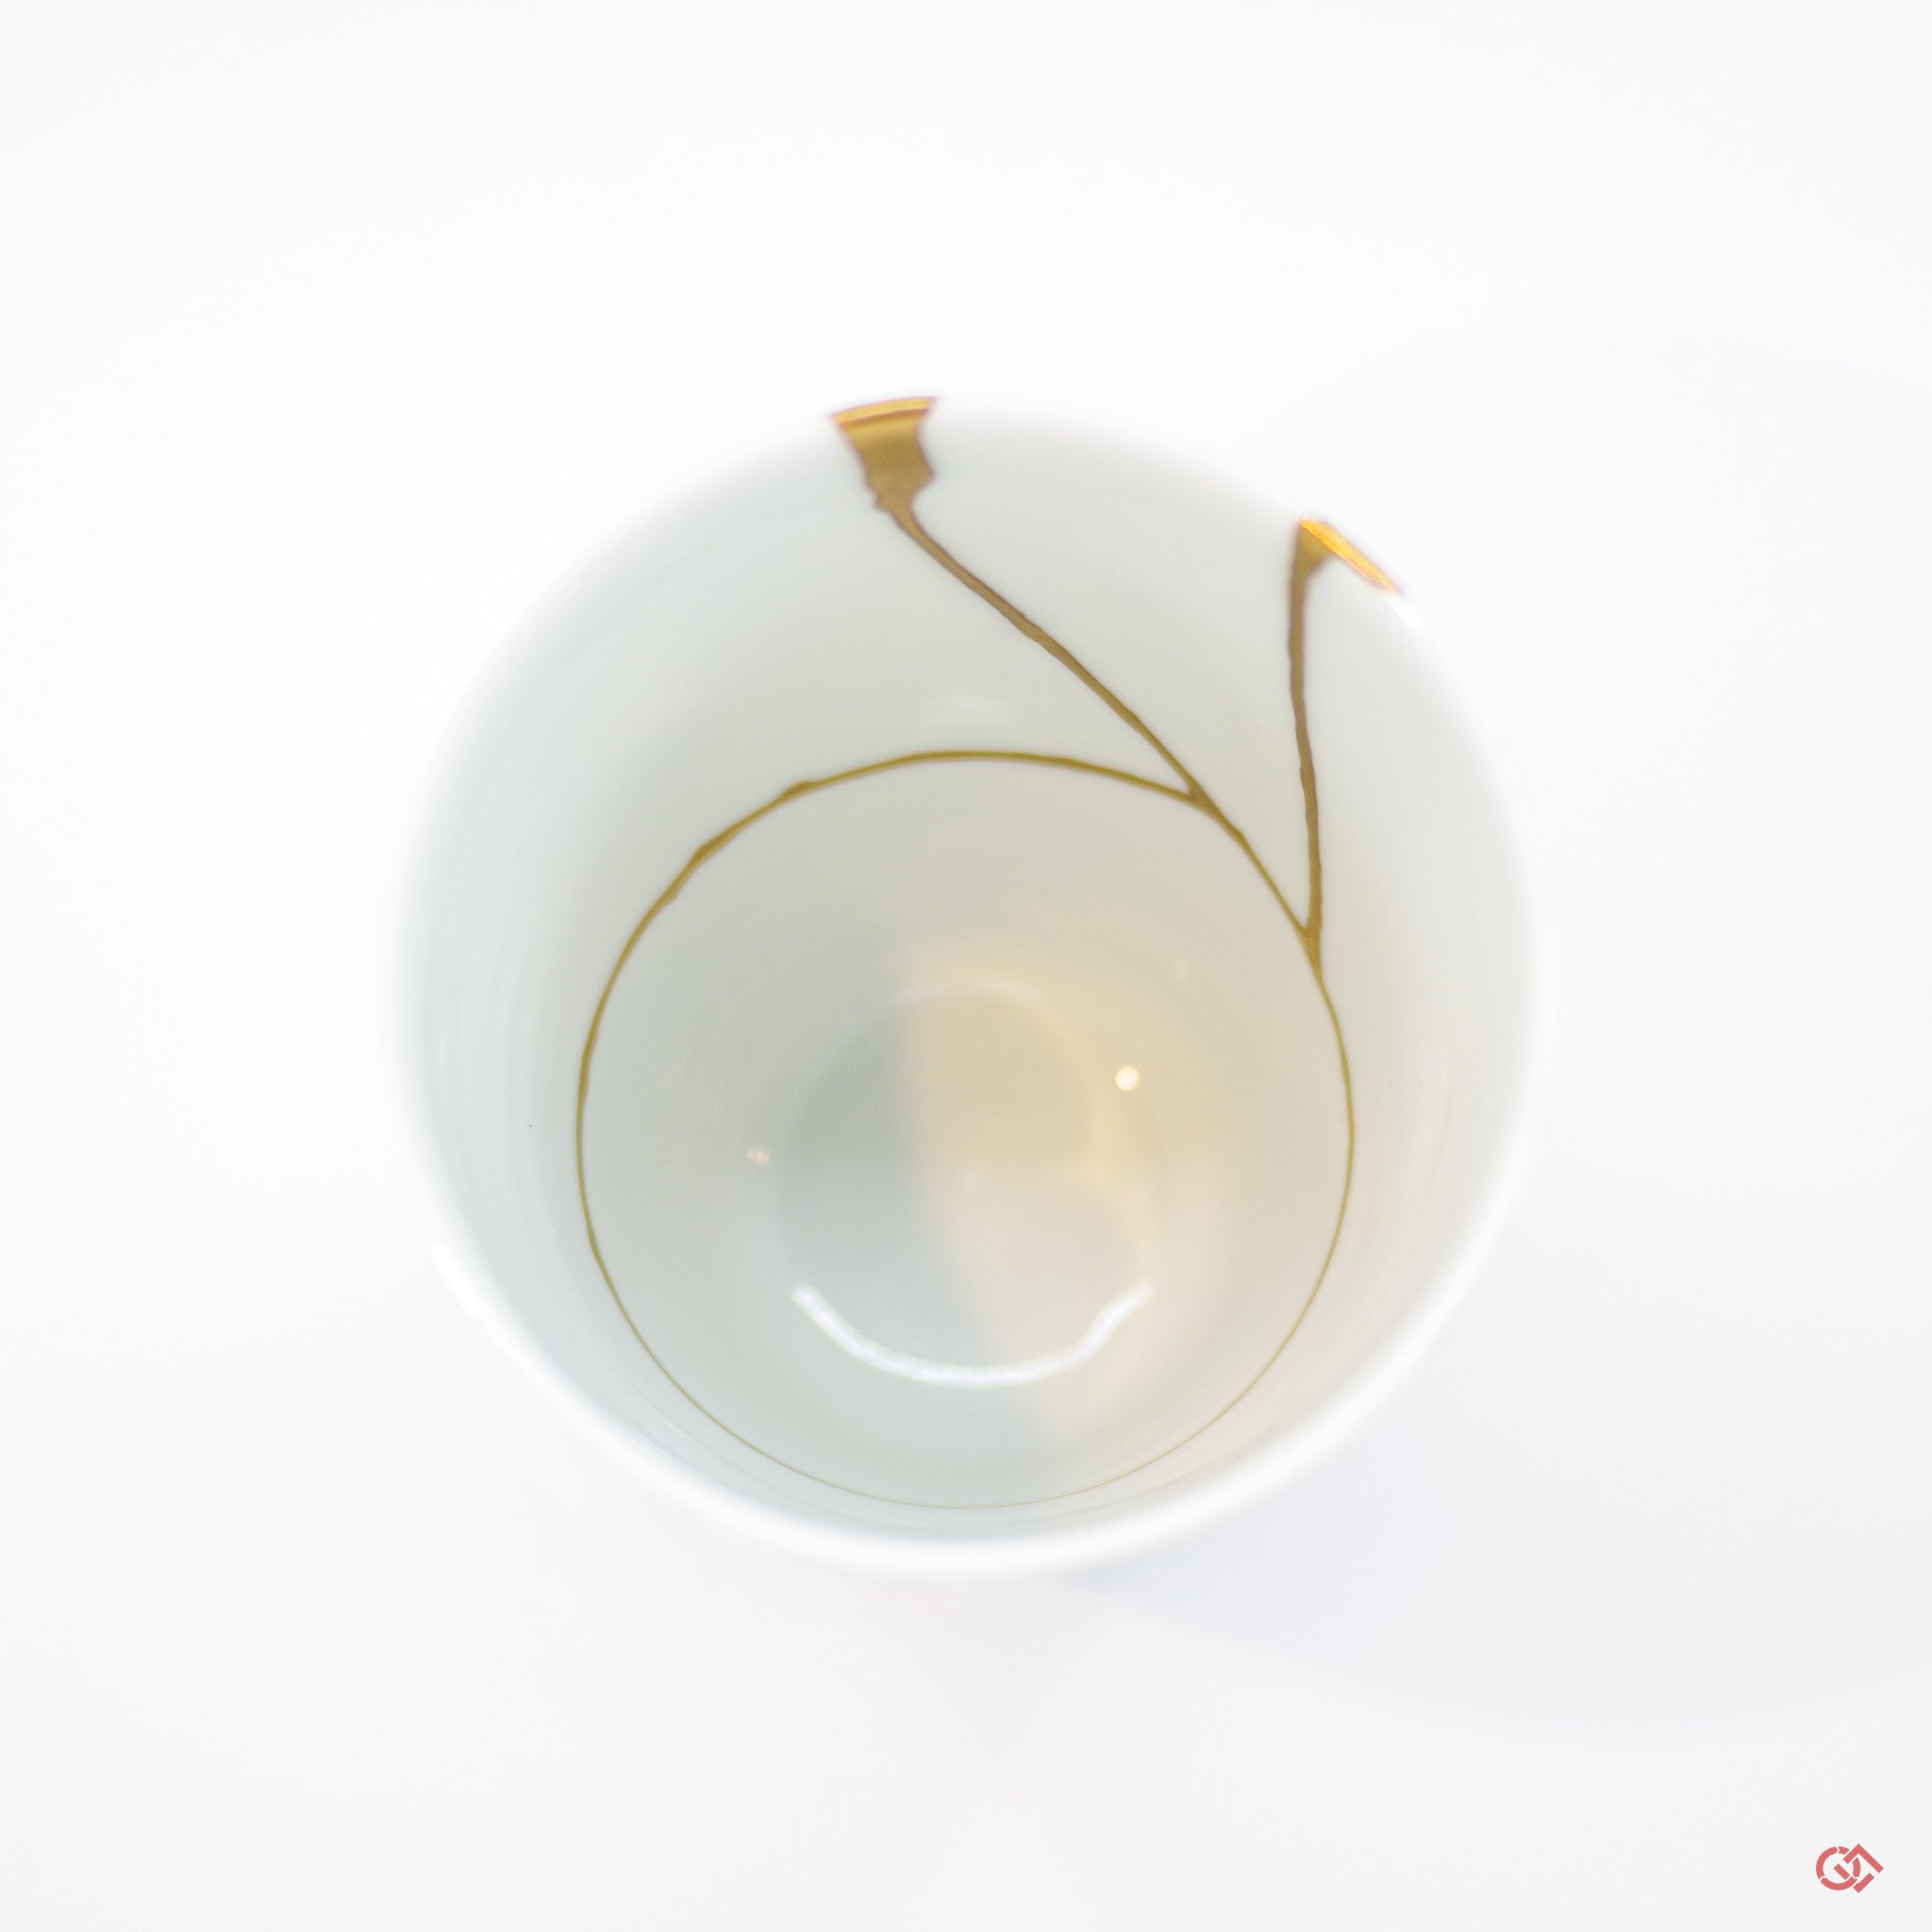 Photo of authentic Kintsugi art from above